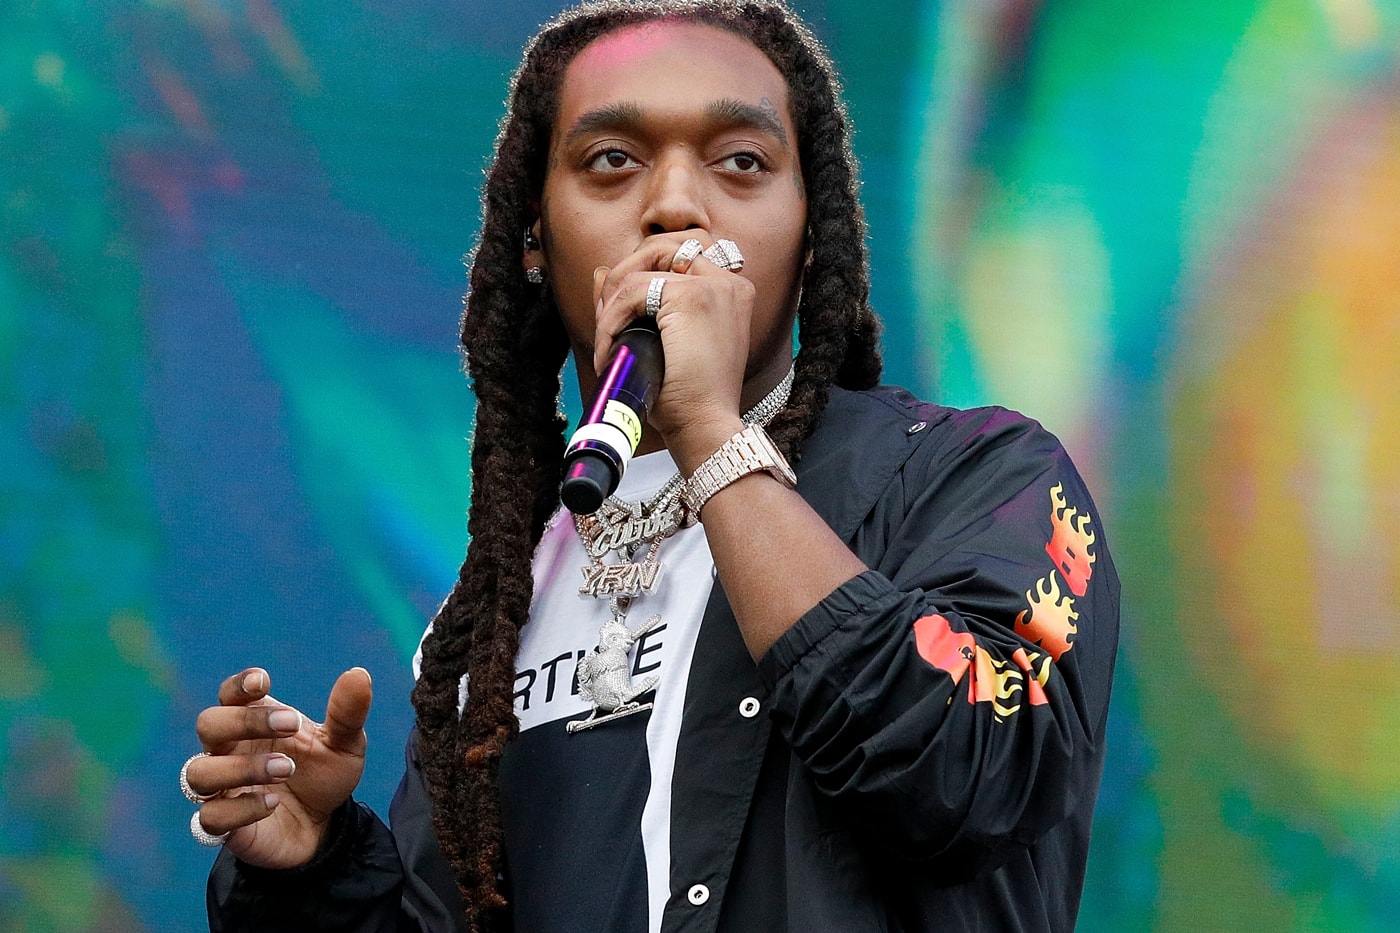 Takeoff YRN Lingo "All Time High" Song Stream rapper hip hop music songs tracks hits singles quality control